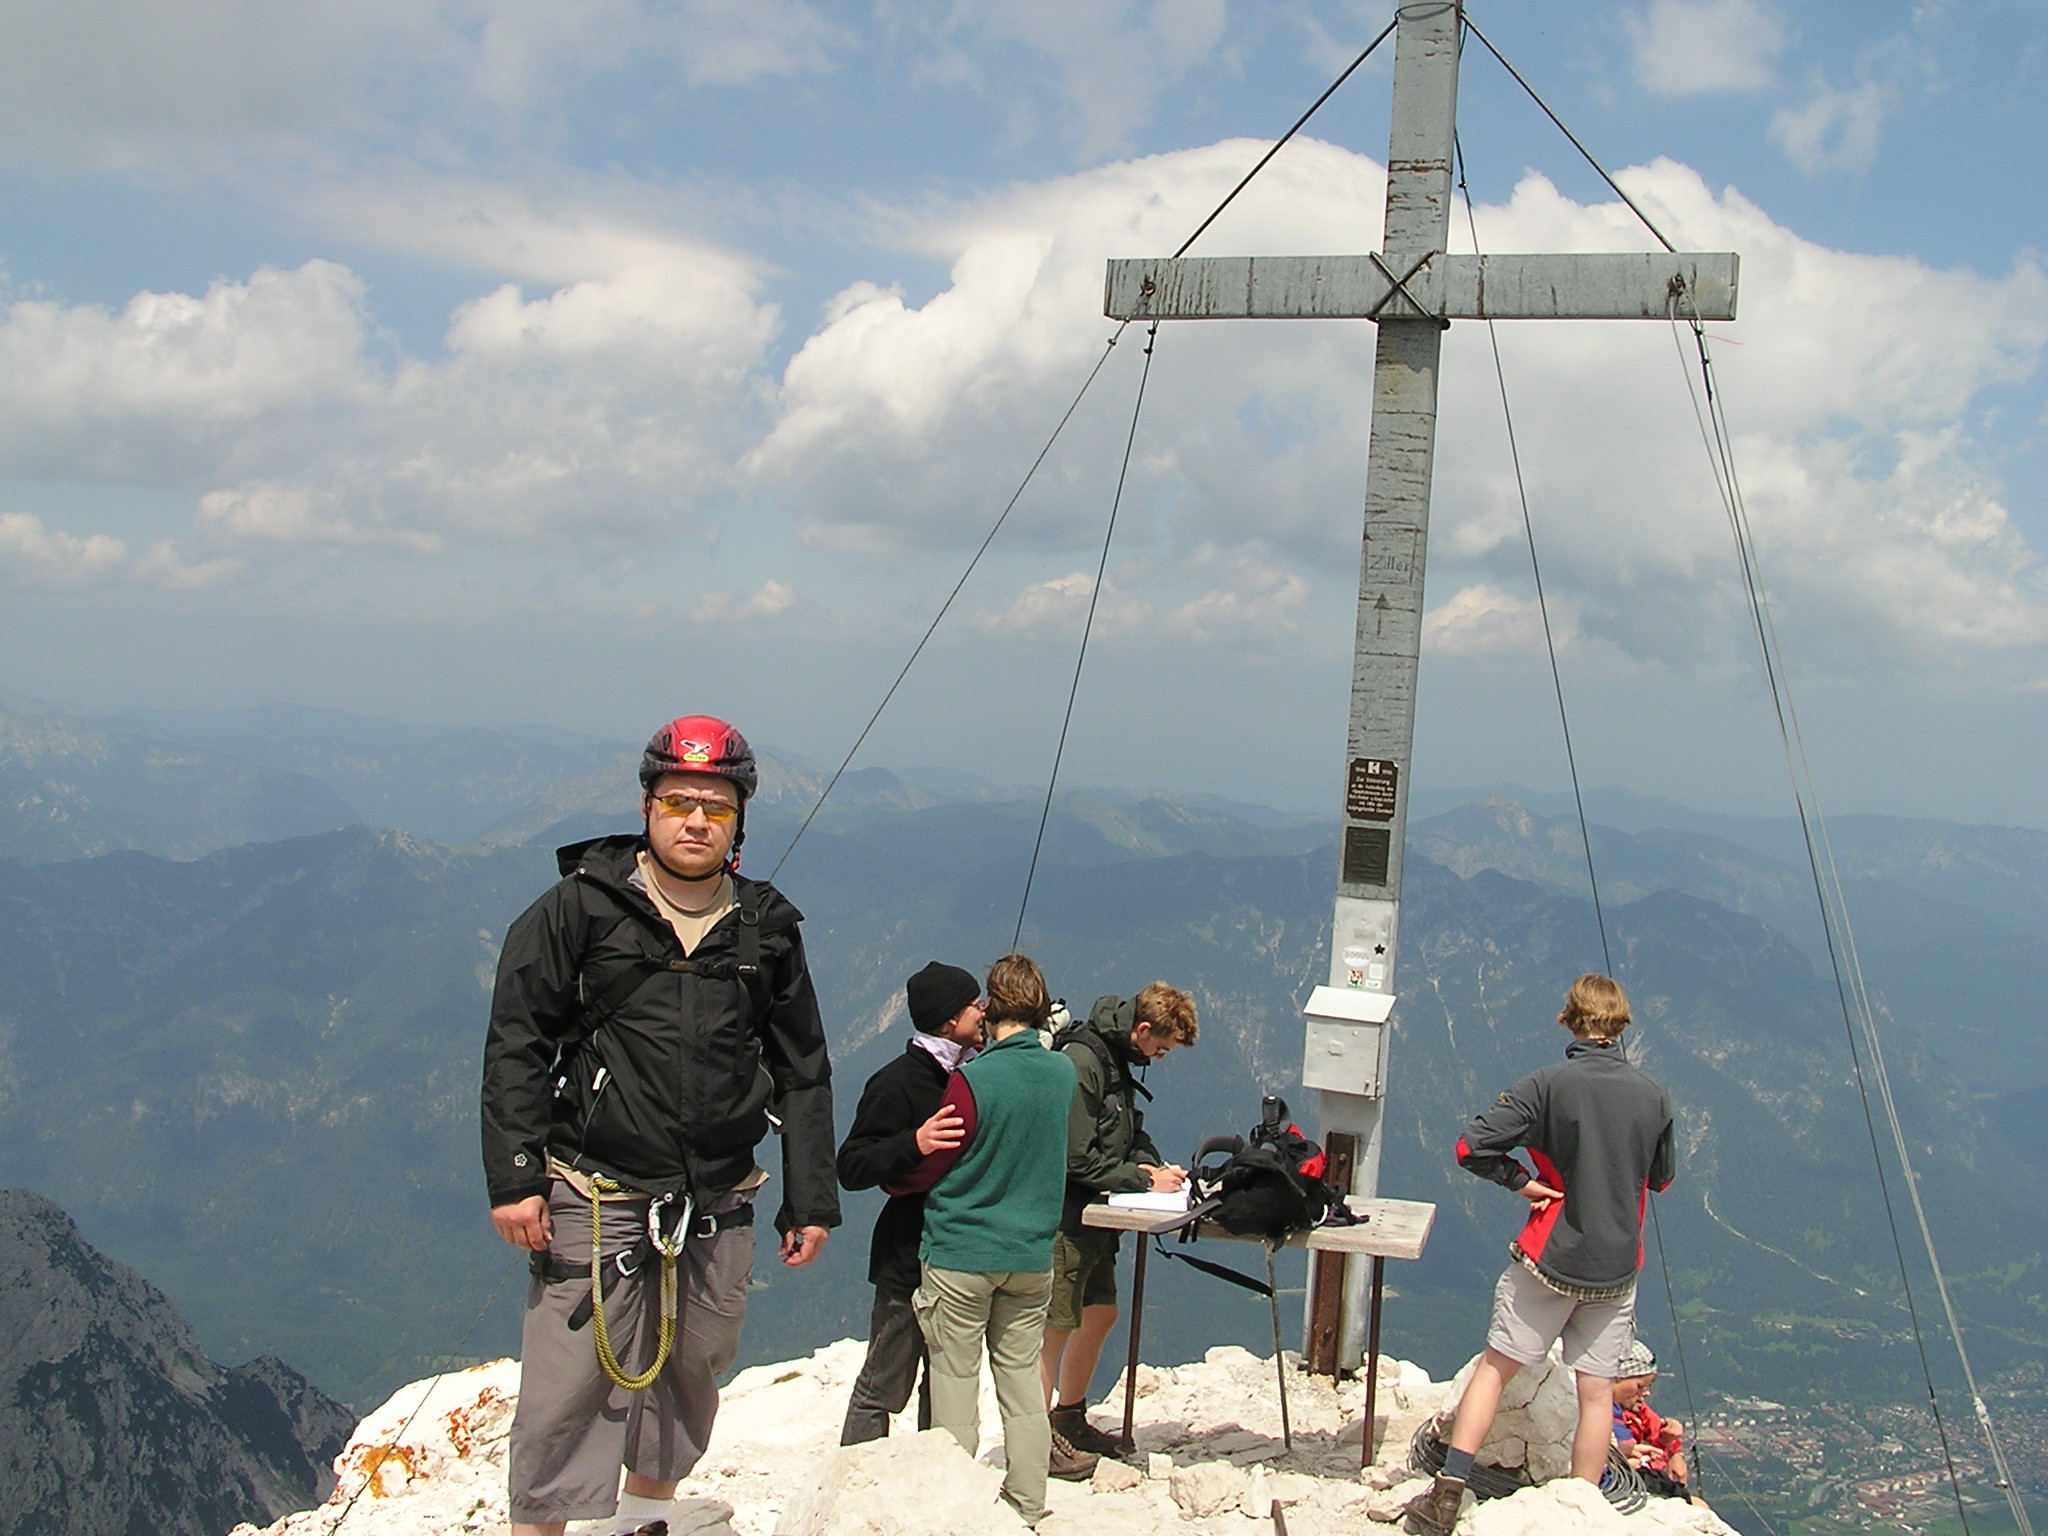 Reaching the top of the Alpspitze (3rd tallest mountain in Germany)